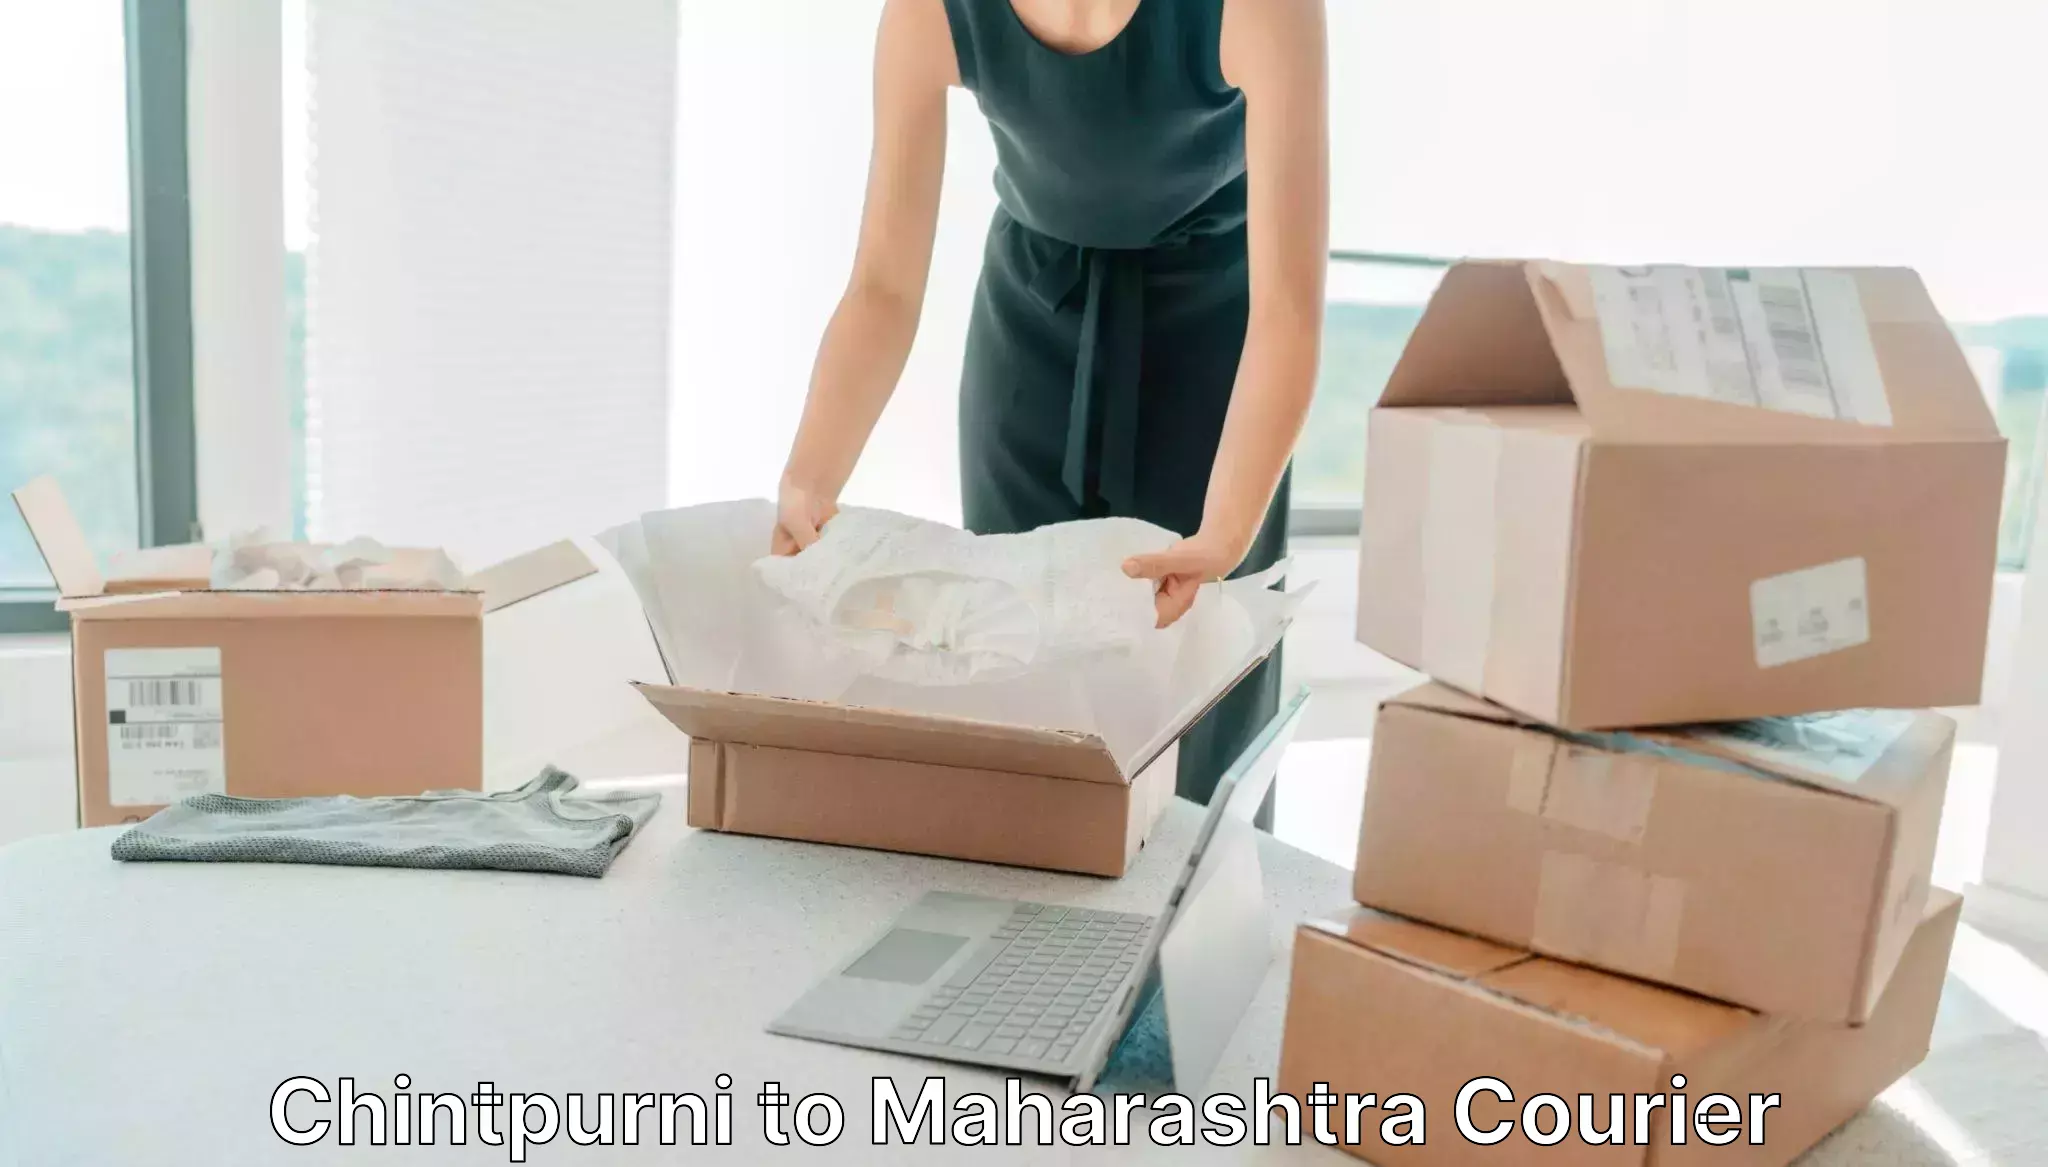 Express package delivery in Chintpurni to Mumbai Port